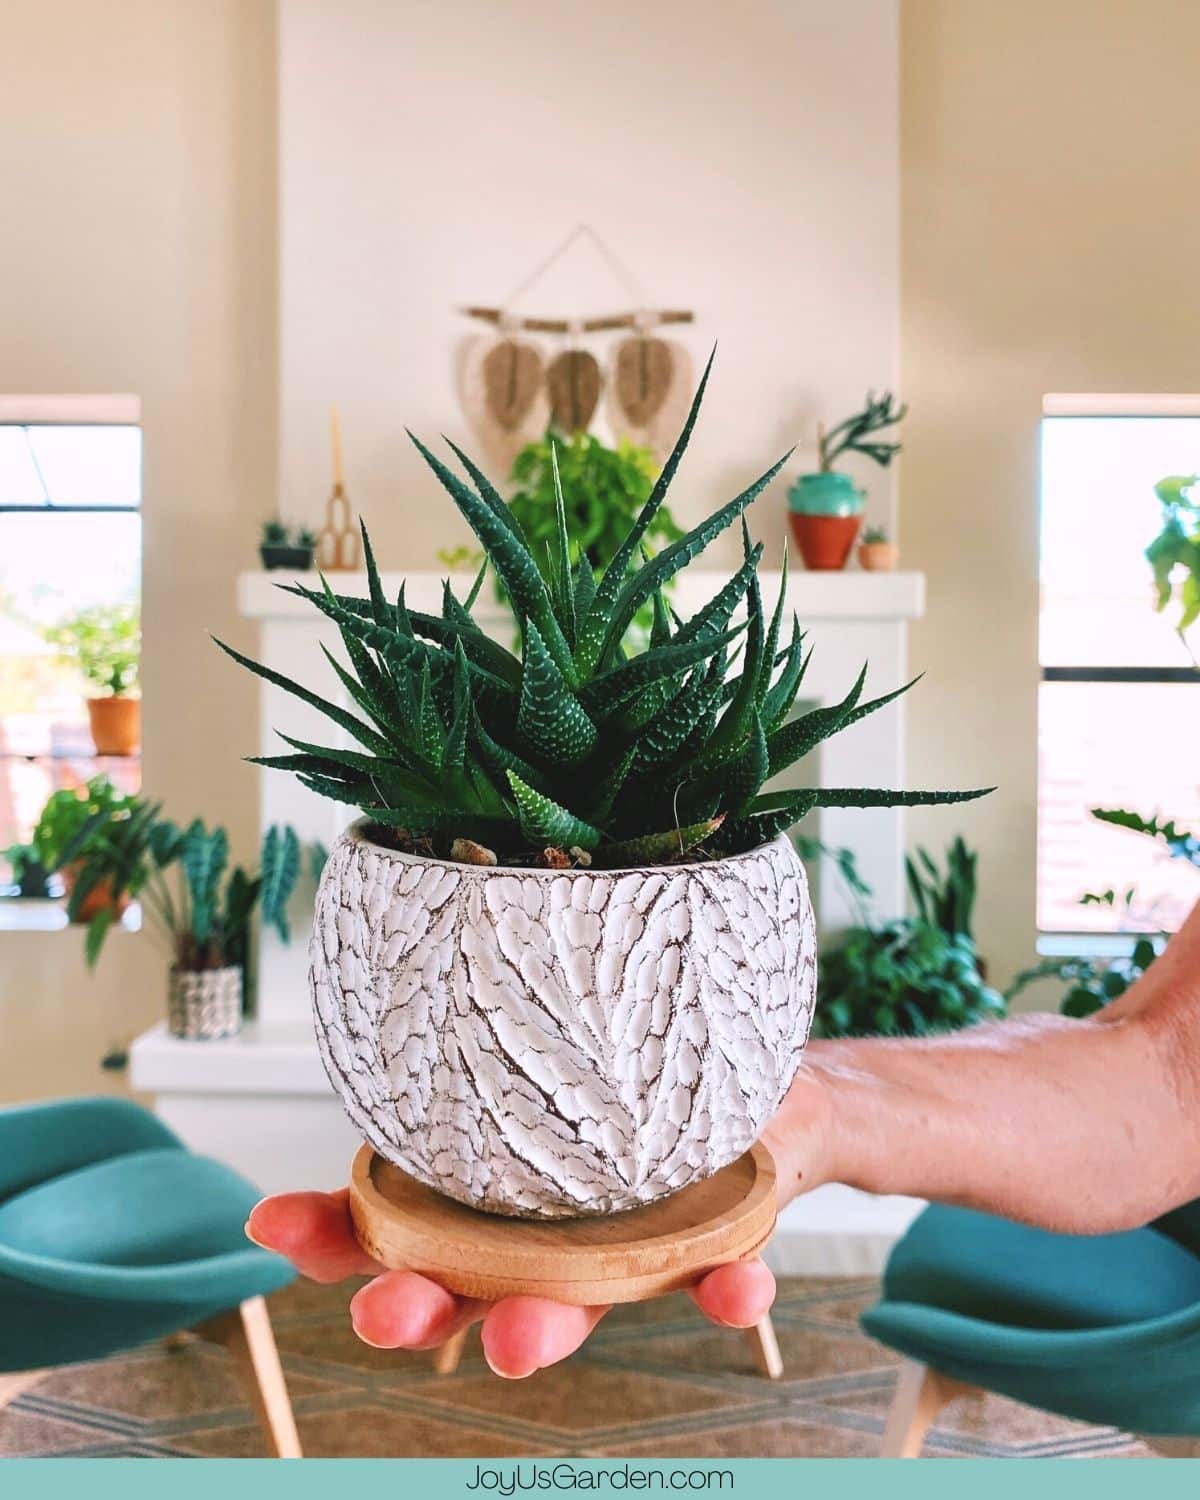 A hand holds a Zebra Plant in a small cement pot with many plants in the background.